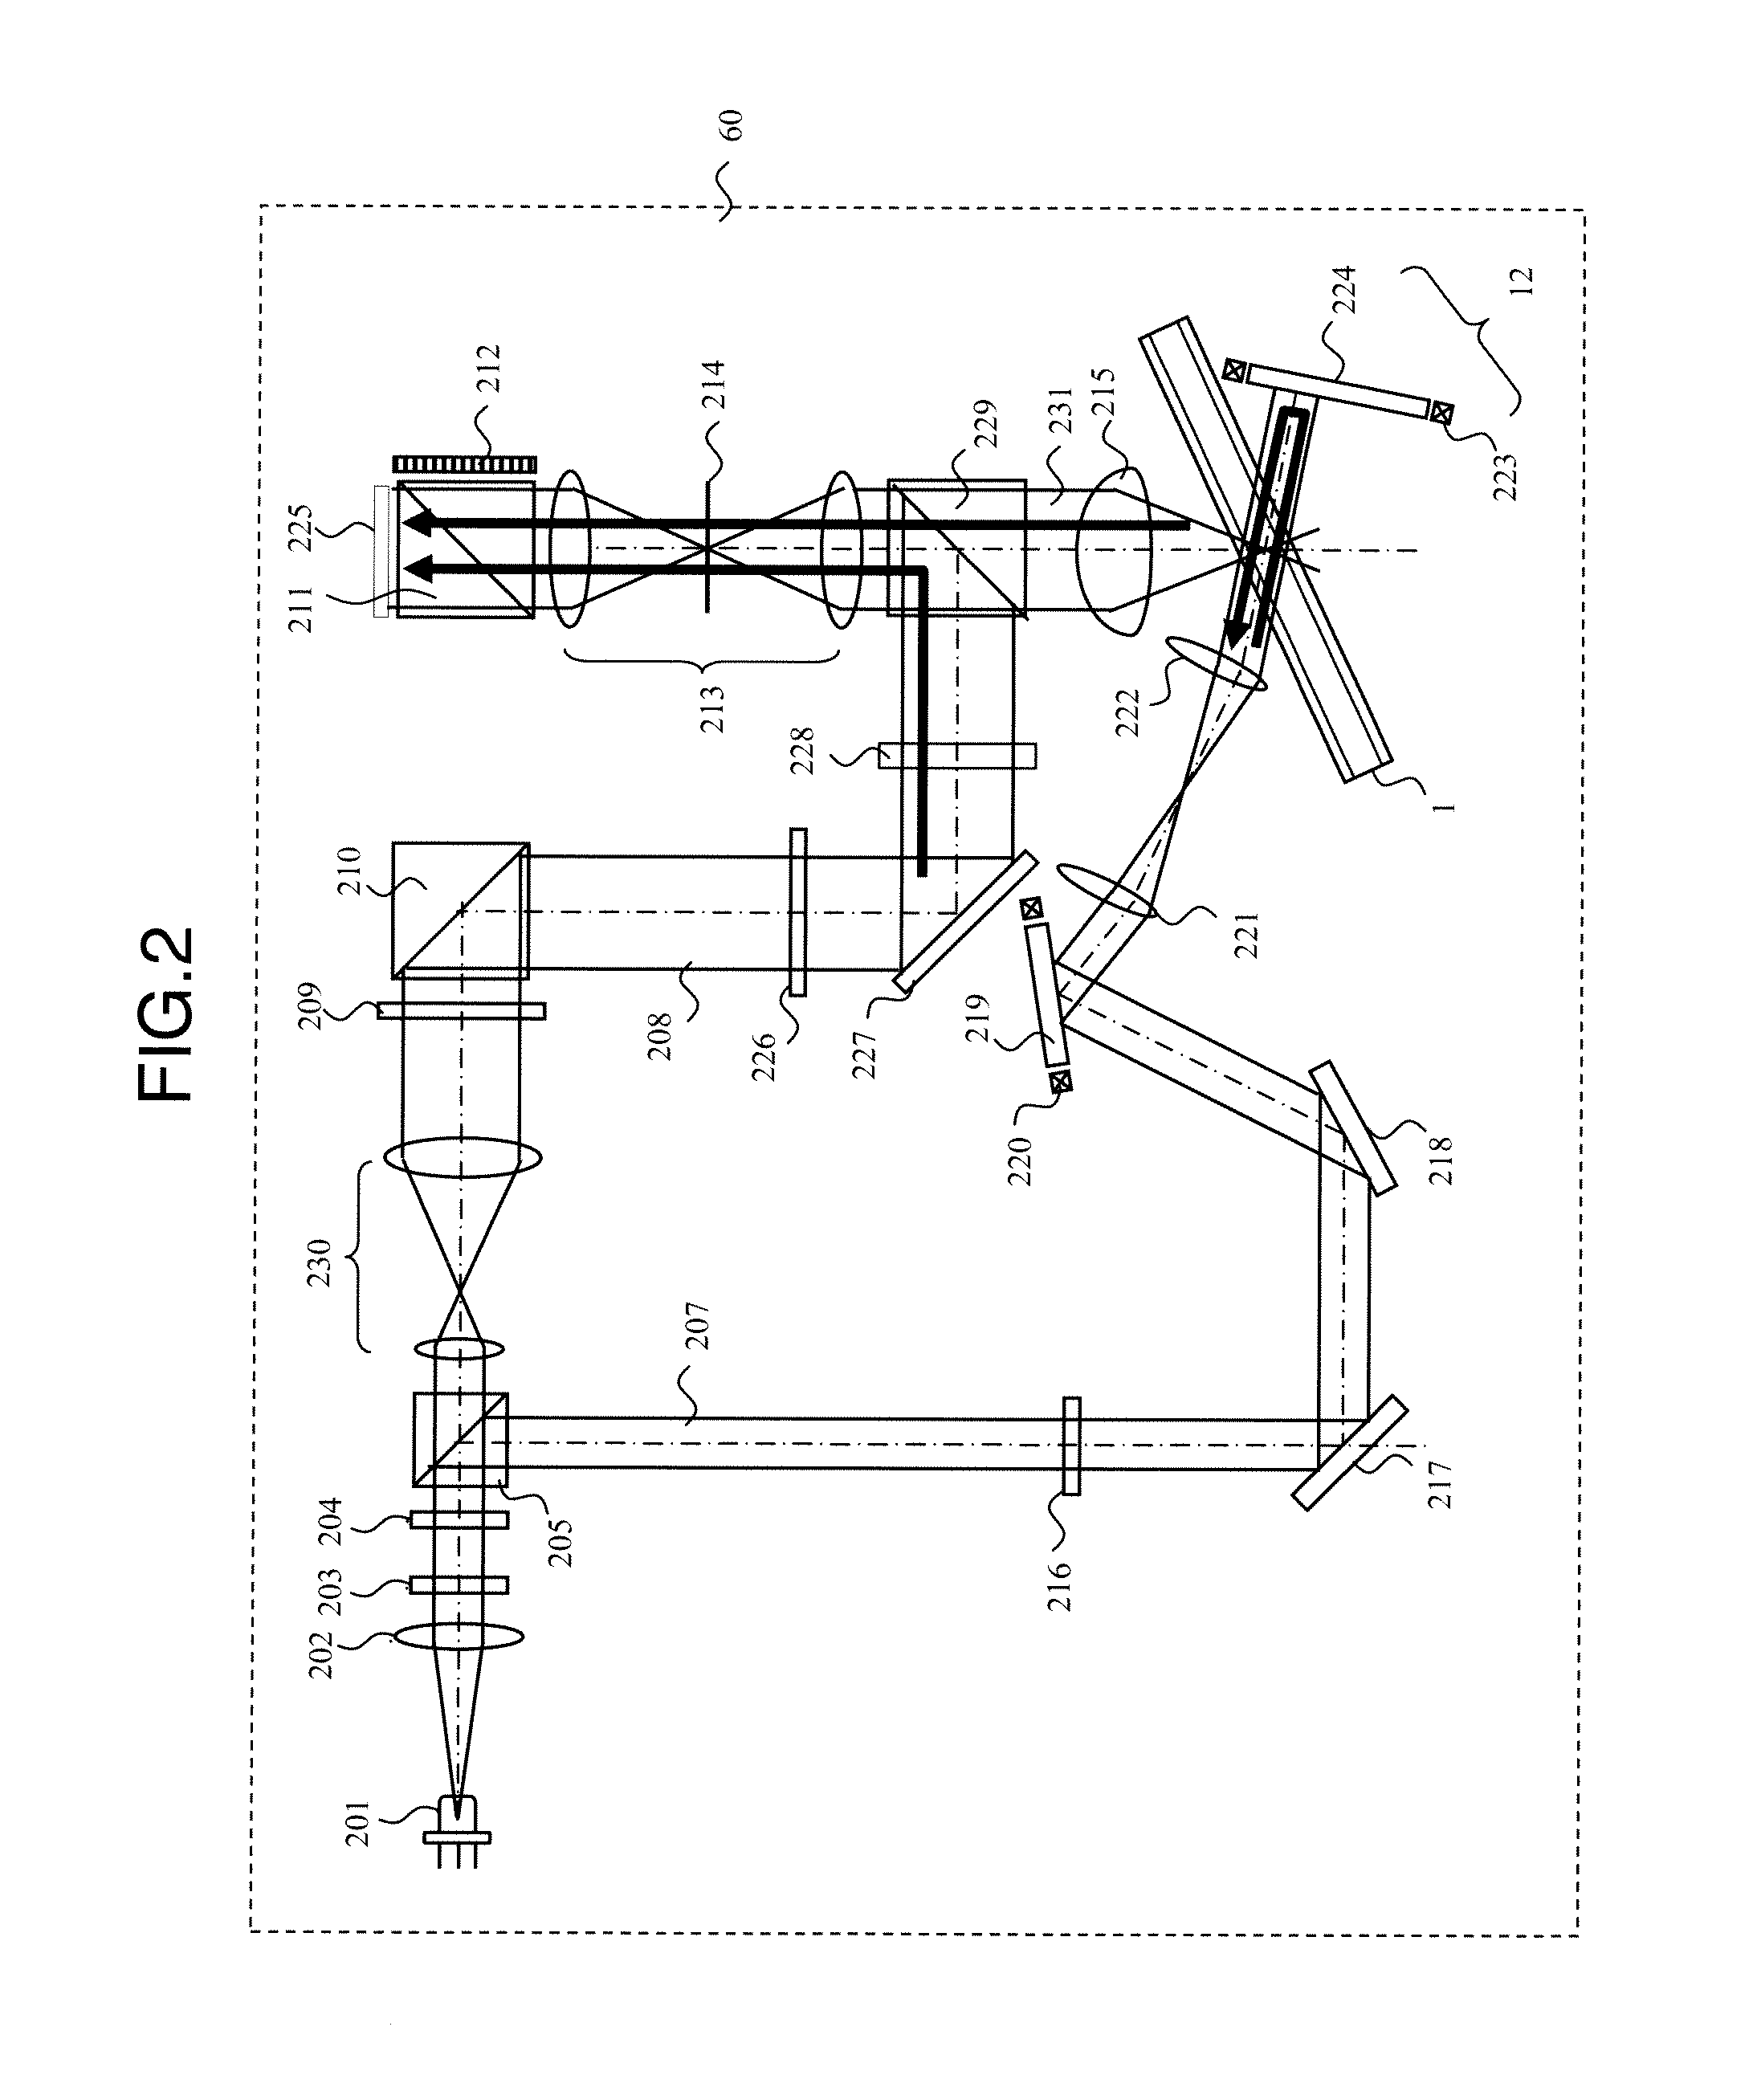 Optical information record/reproduction apparatus and reproduction apparatus